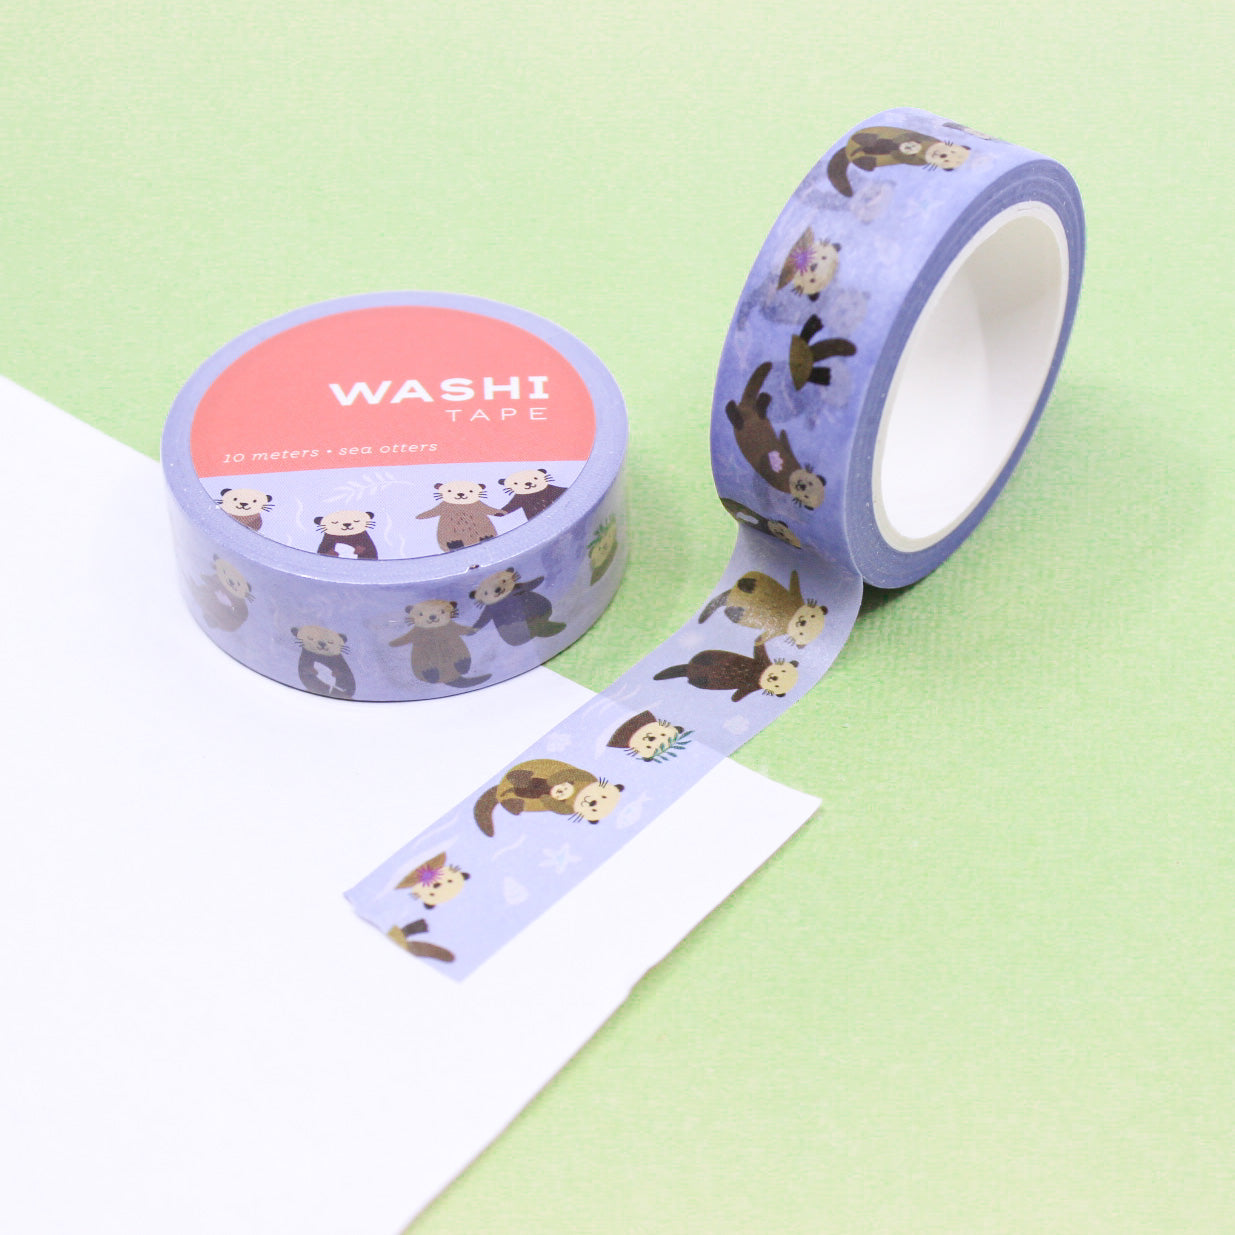 Dive into creativity with adorable sea otters in various poses, set against a playful purple backdrop. Perfect for scrapbooking beach memories or adding a marine theme to your journal! This tape is from Girl of All Work and sold at BBB Supplies Craft Shop.